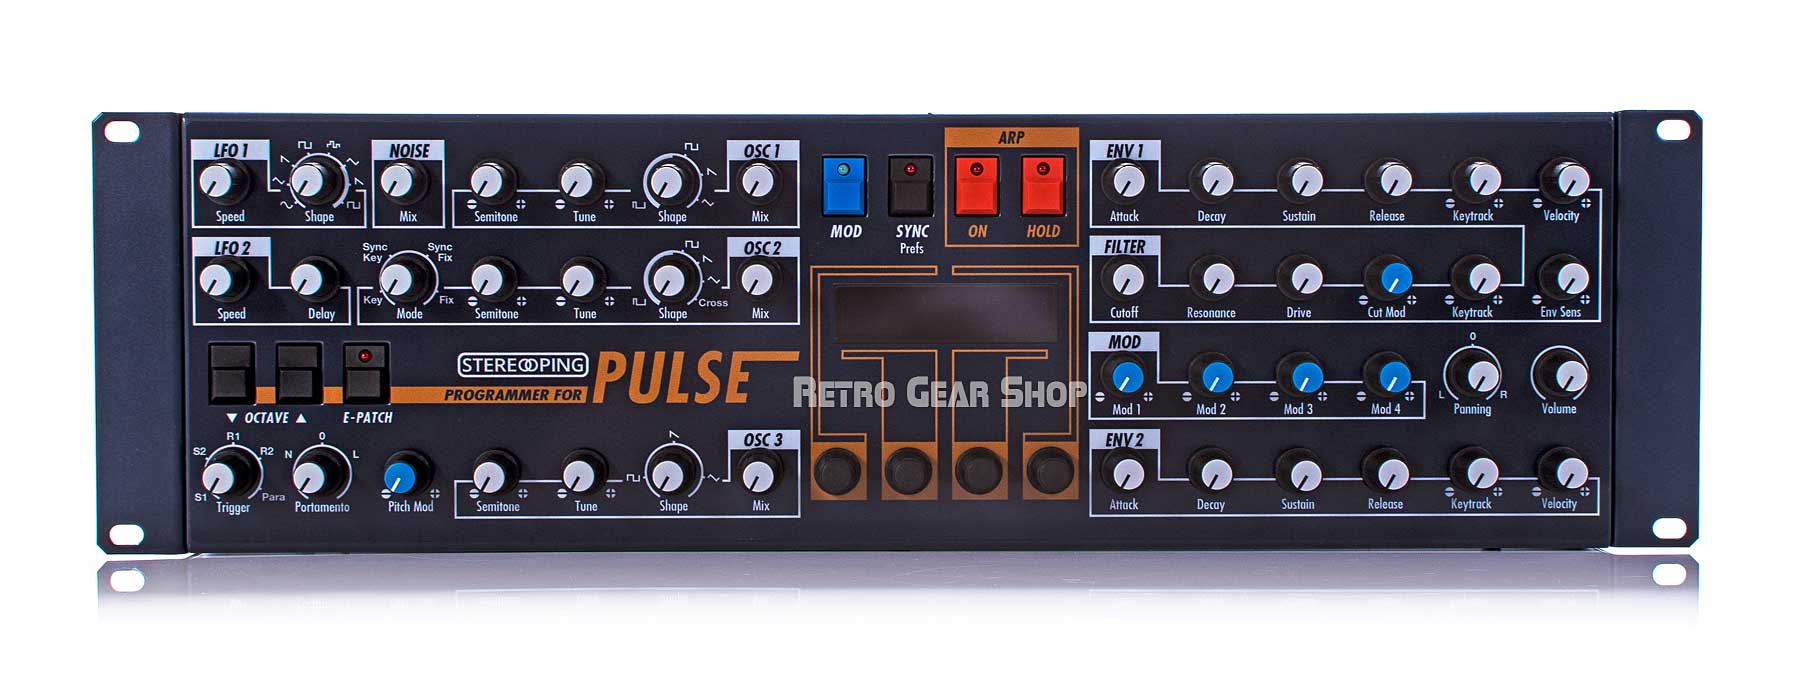 Stereoping Programmer Waldorf Pulse 1 Midi Controller